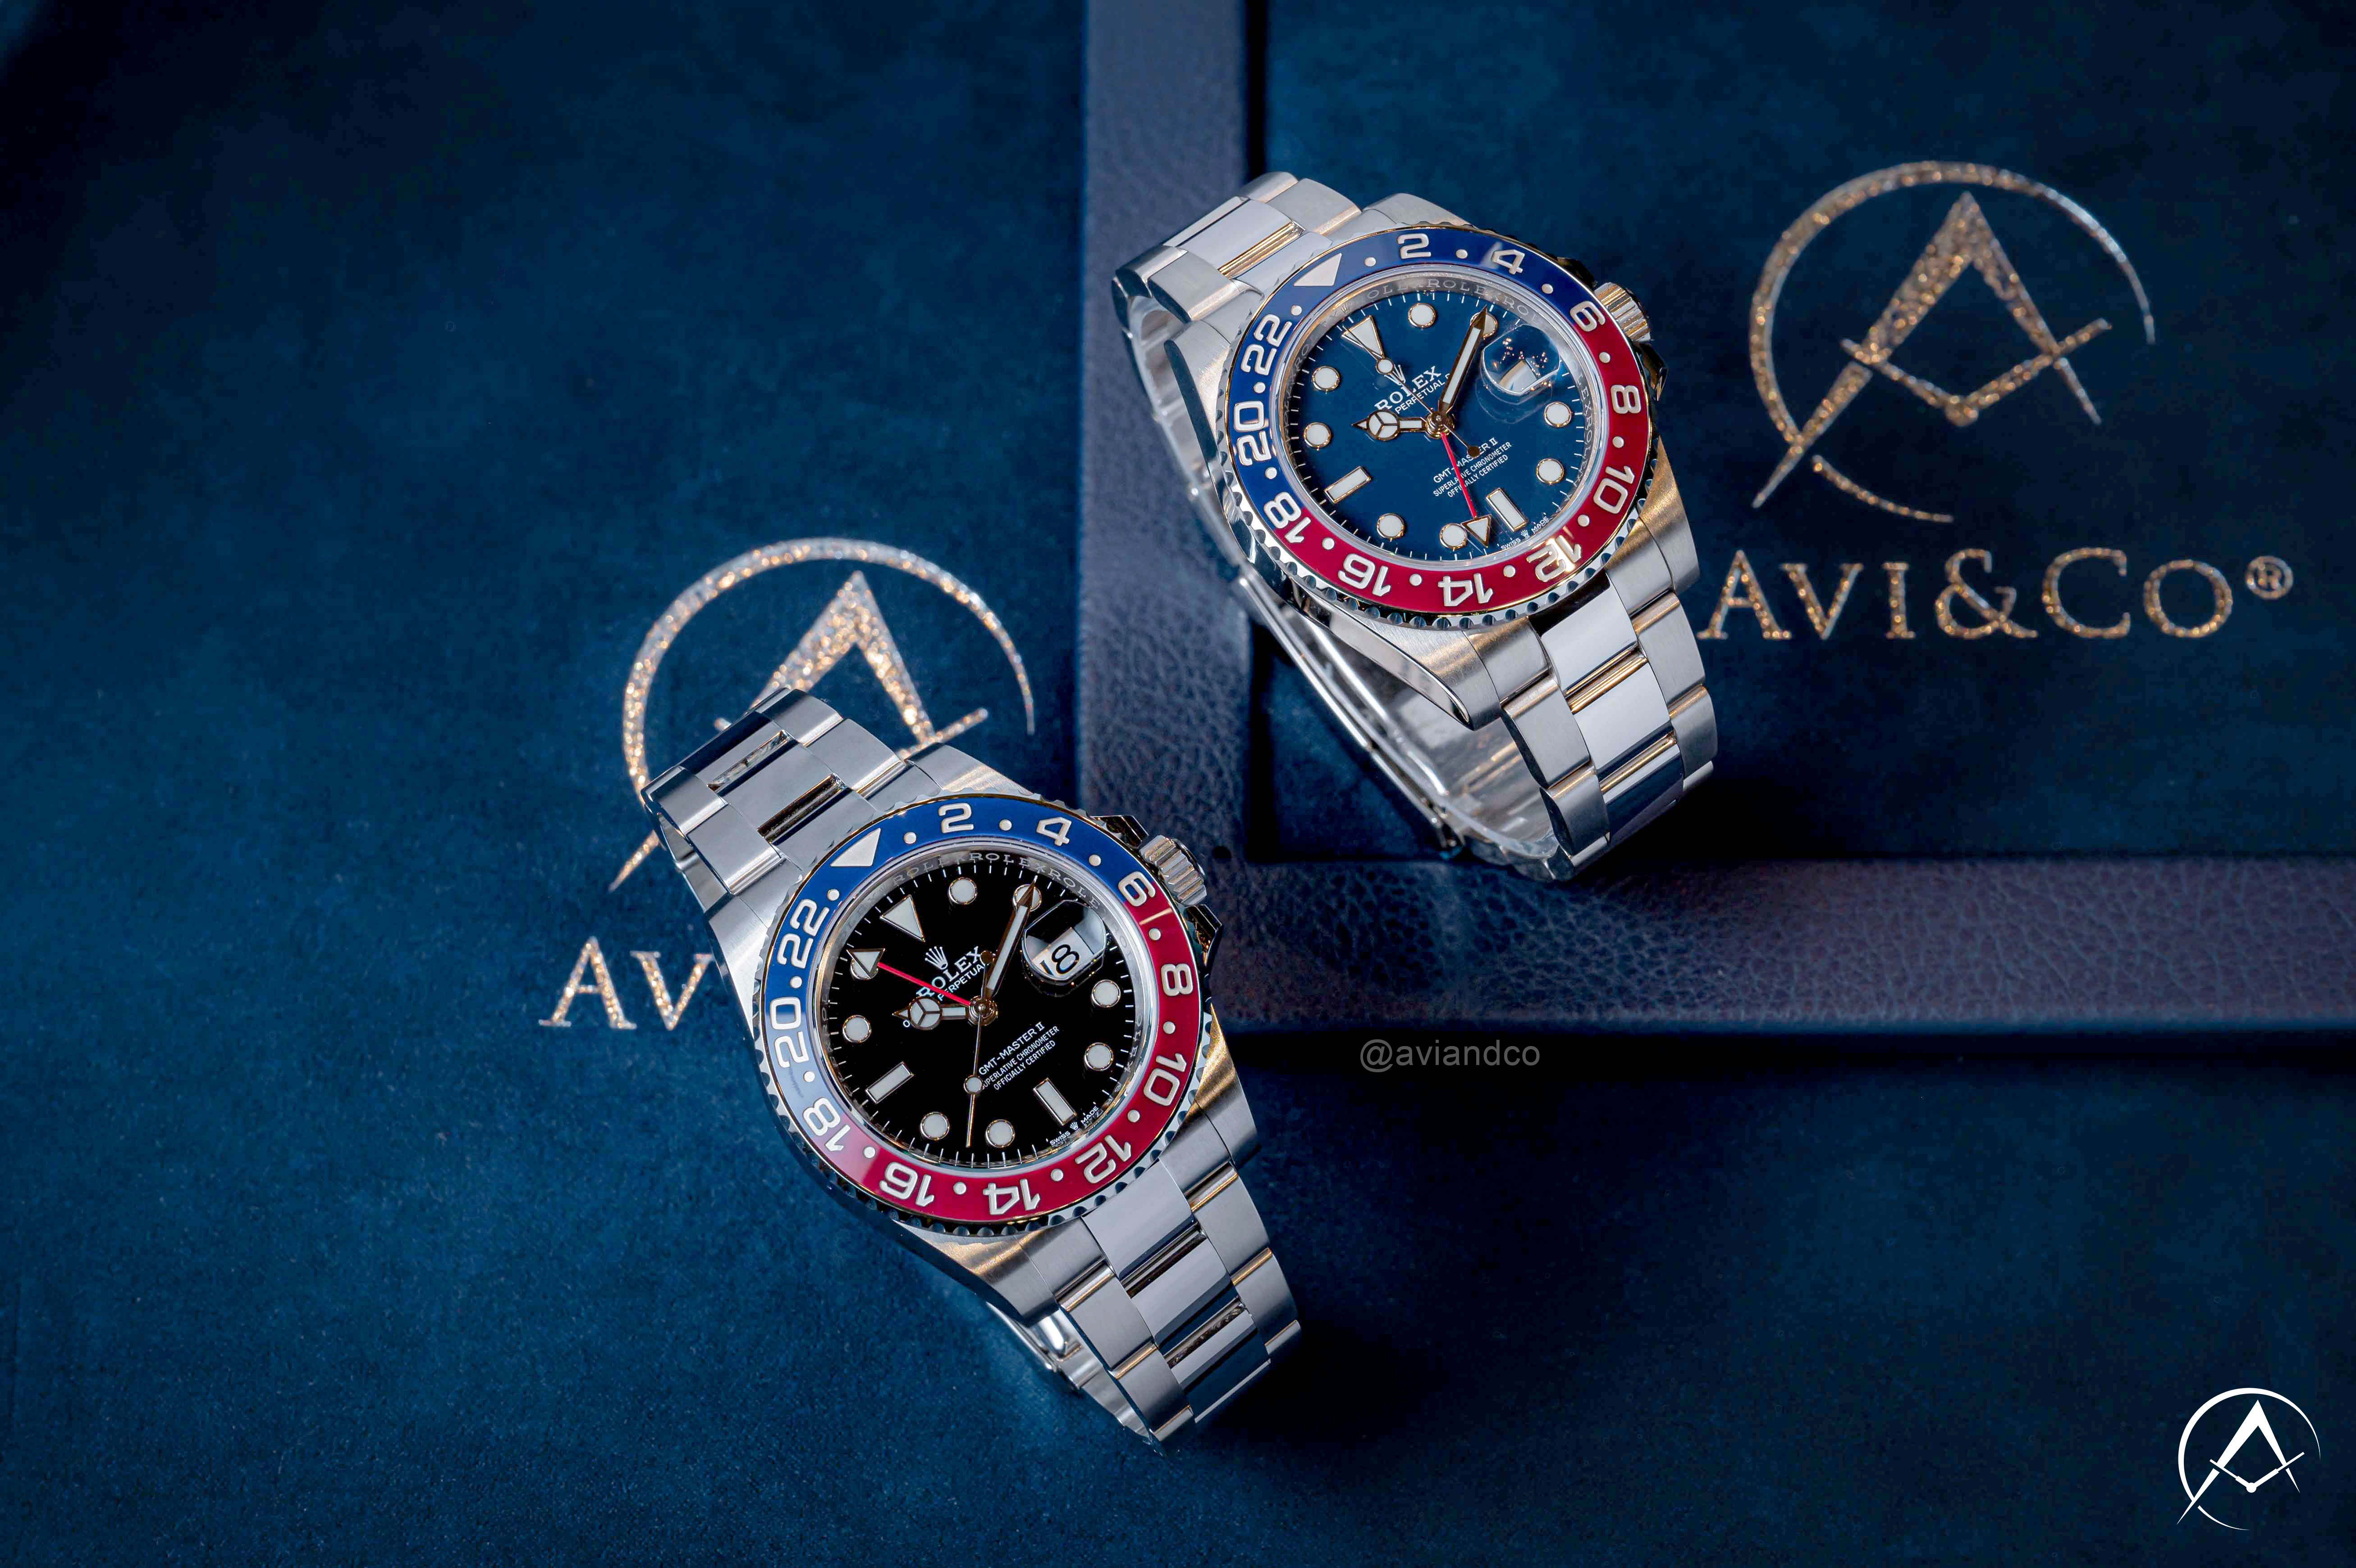 Two Similar Luxury Timepieces with Red and Blue Pepsi Bezels, 40 mm Case Sizes, and Different Materials Displayed on Clear C-Rings Above a Navy Blue Avi & Co. Watch Pad.